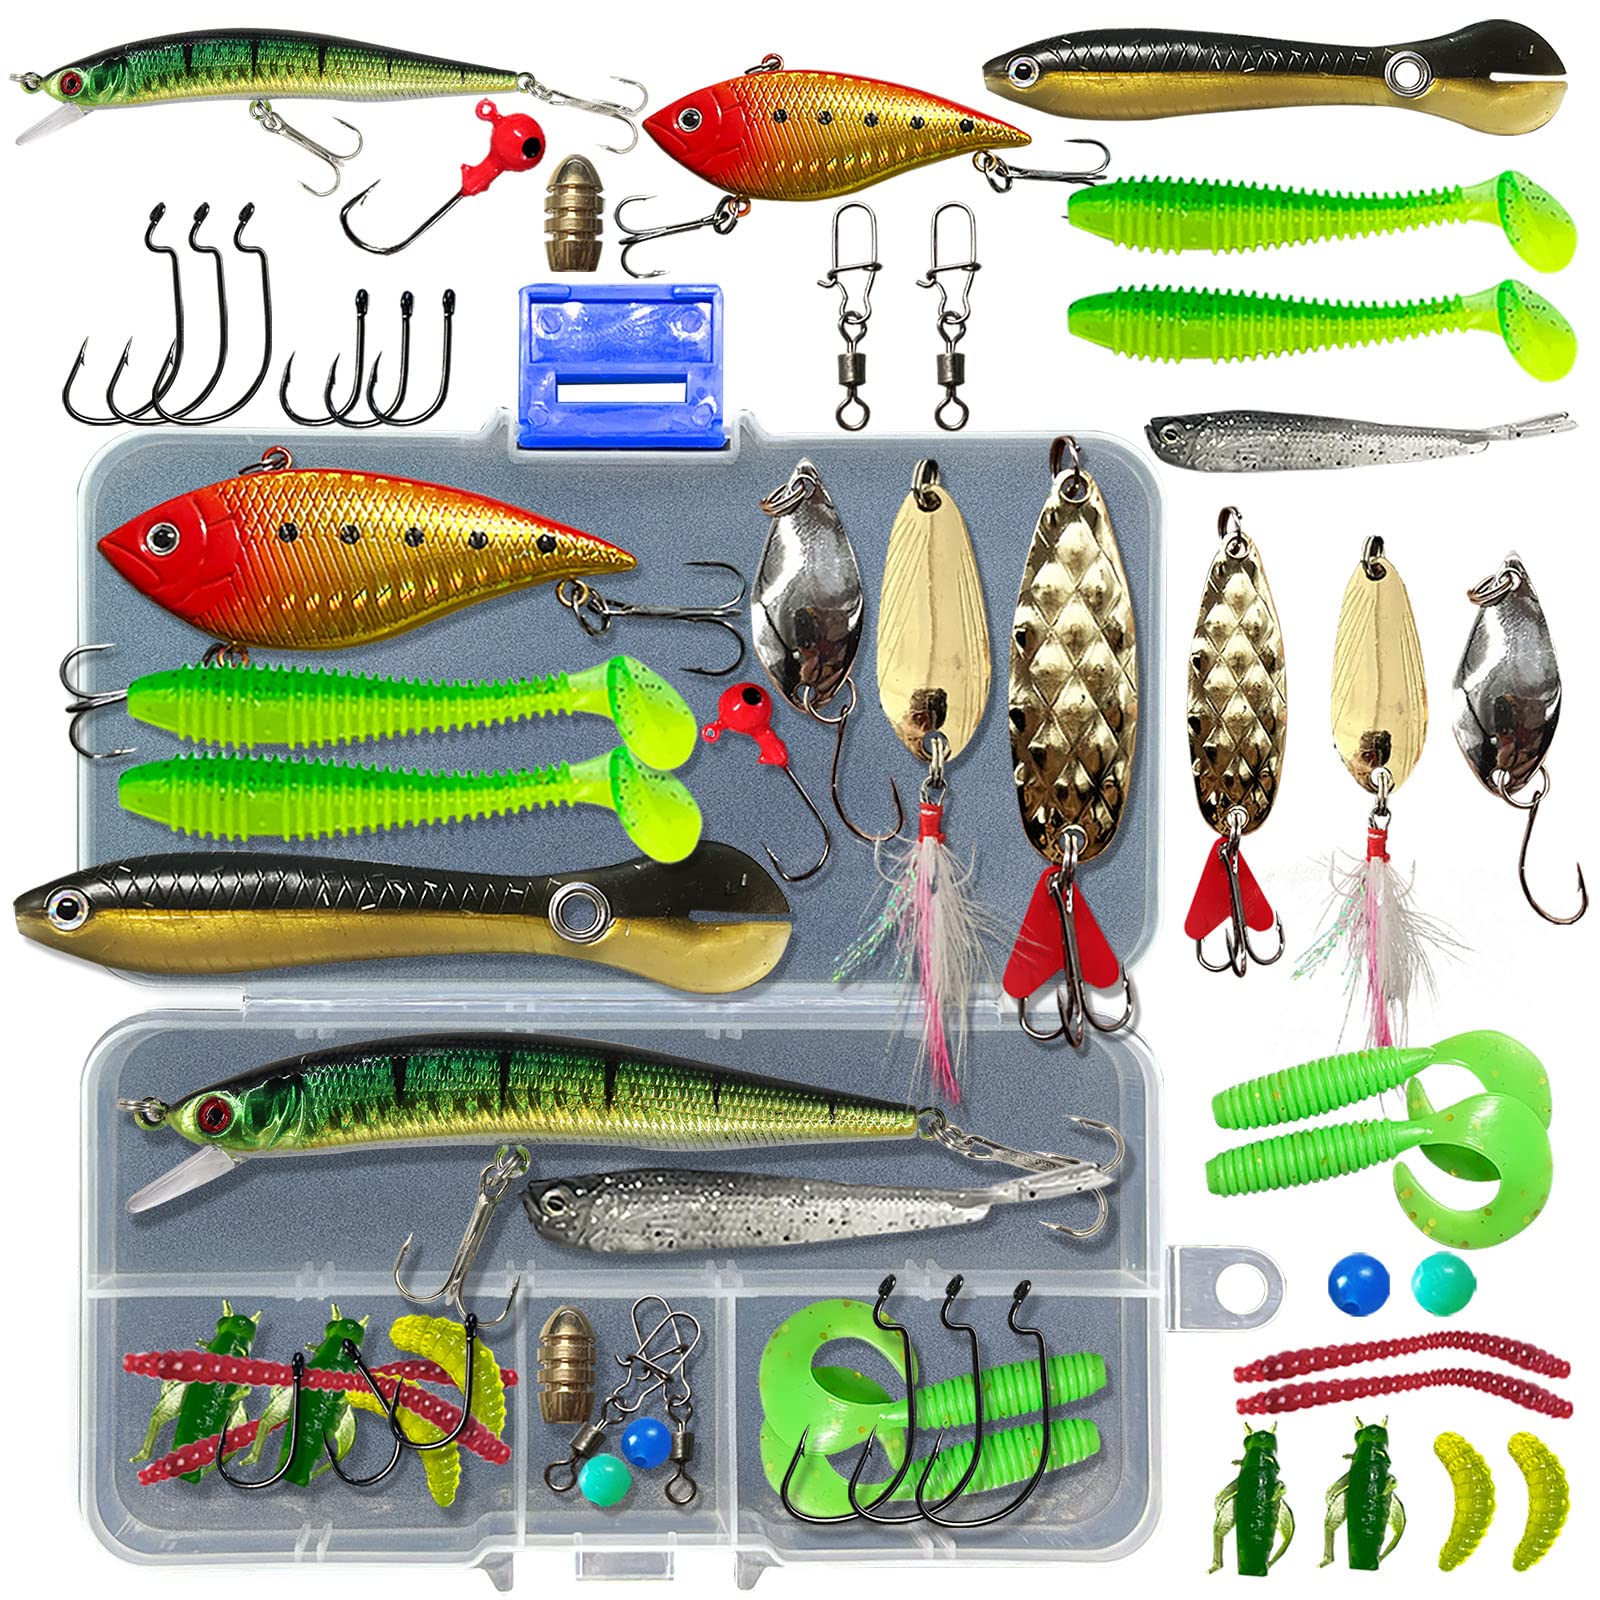 Worm Fishing Baits & Lures for sale, Shop with Afterpay